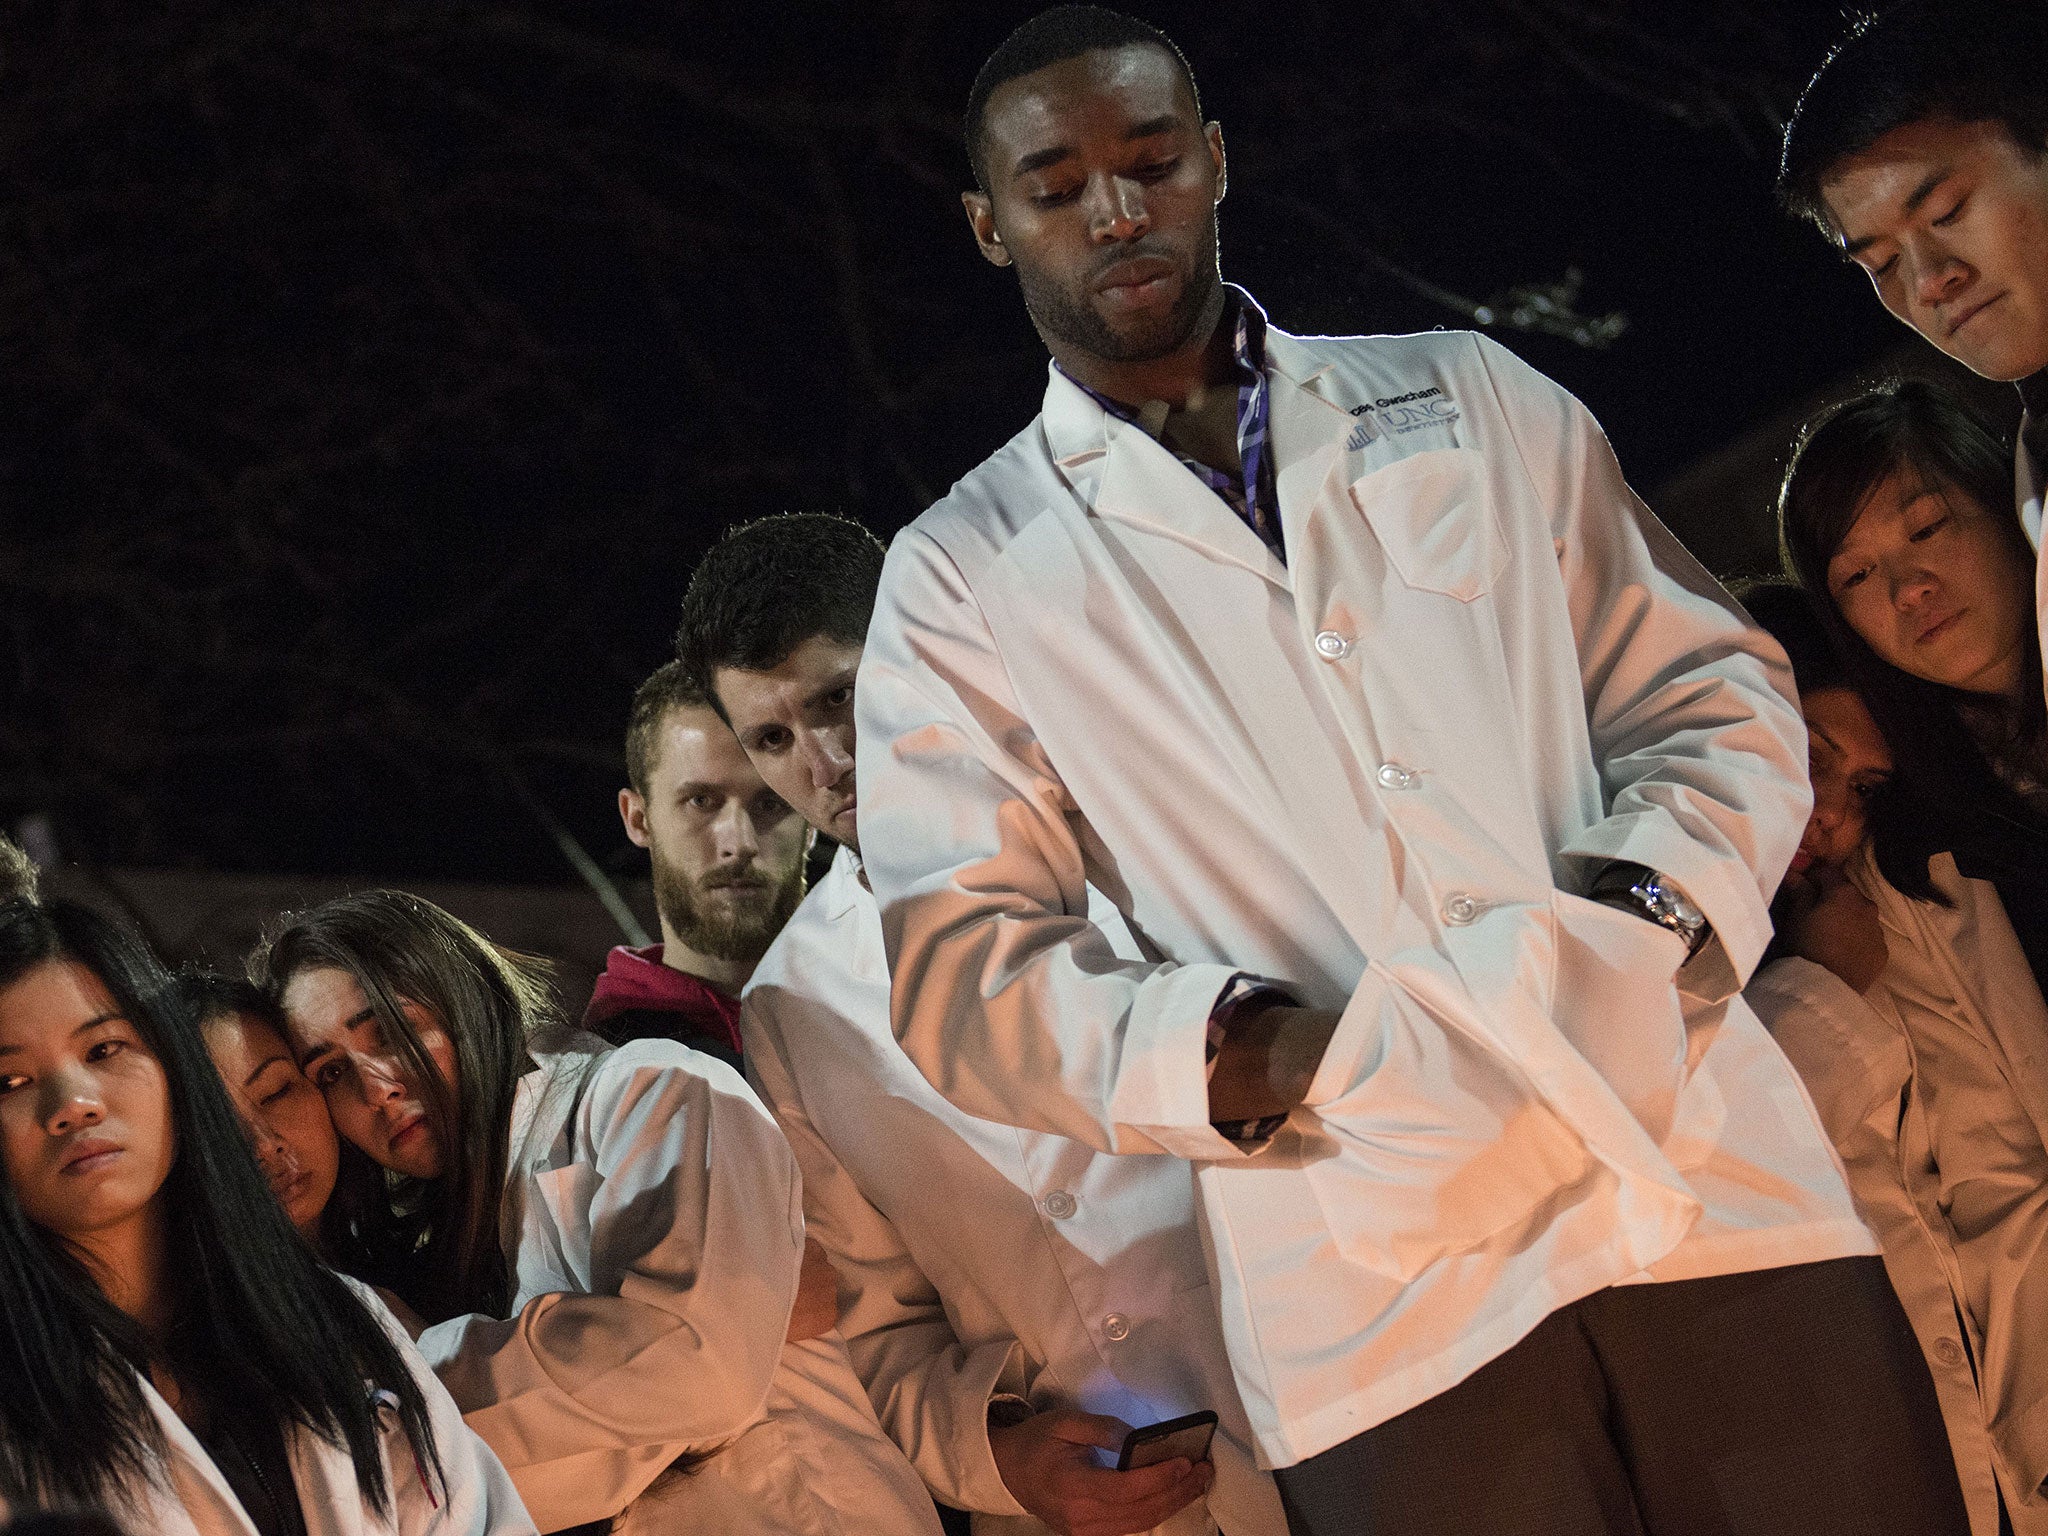 Dentistry students and others huddle together during a vigil at the University of North Carolina following the murders of Deah Shaddy Barakat, his wife Yusor Mohammed and her sister Razan Mohammed Abu-Salha